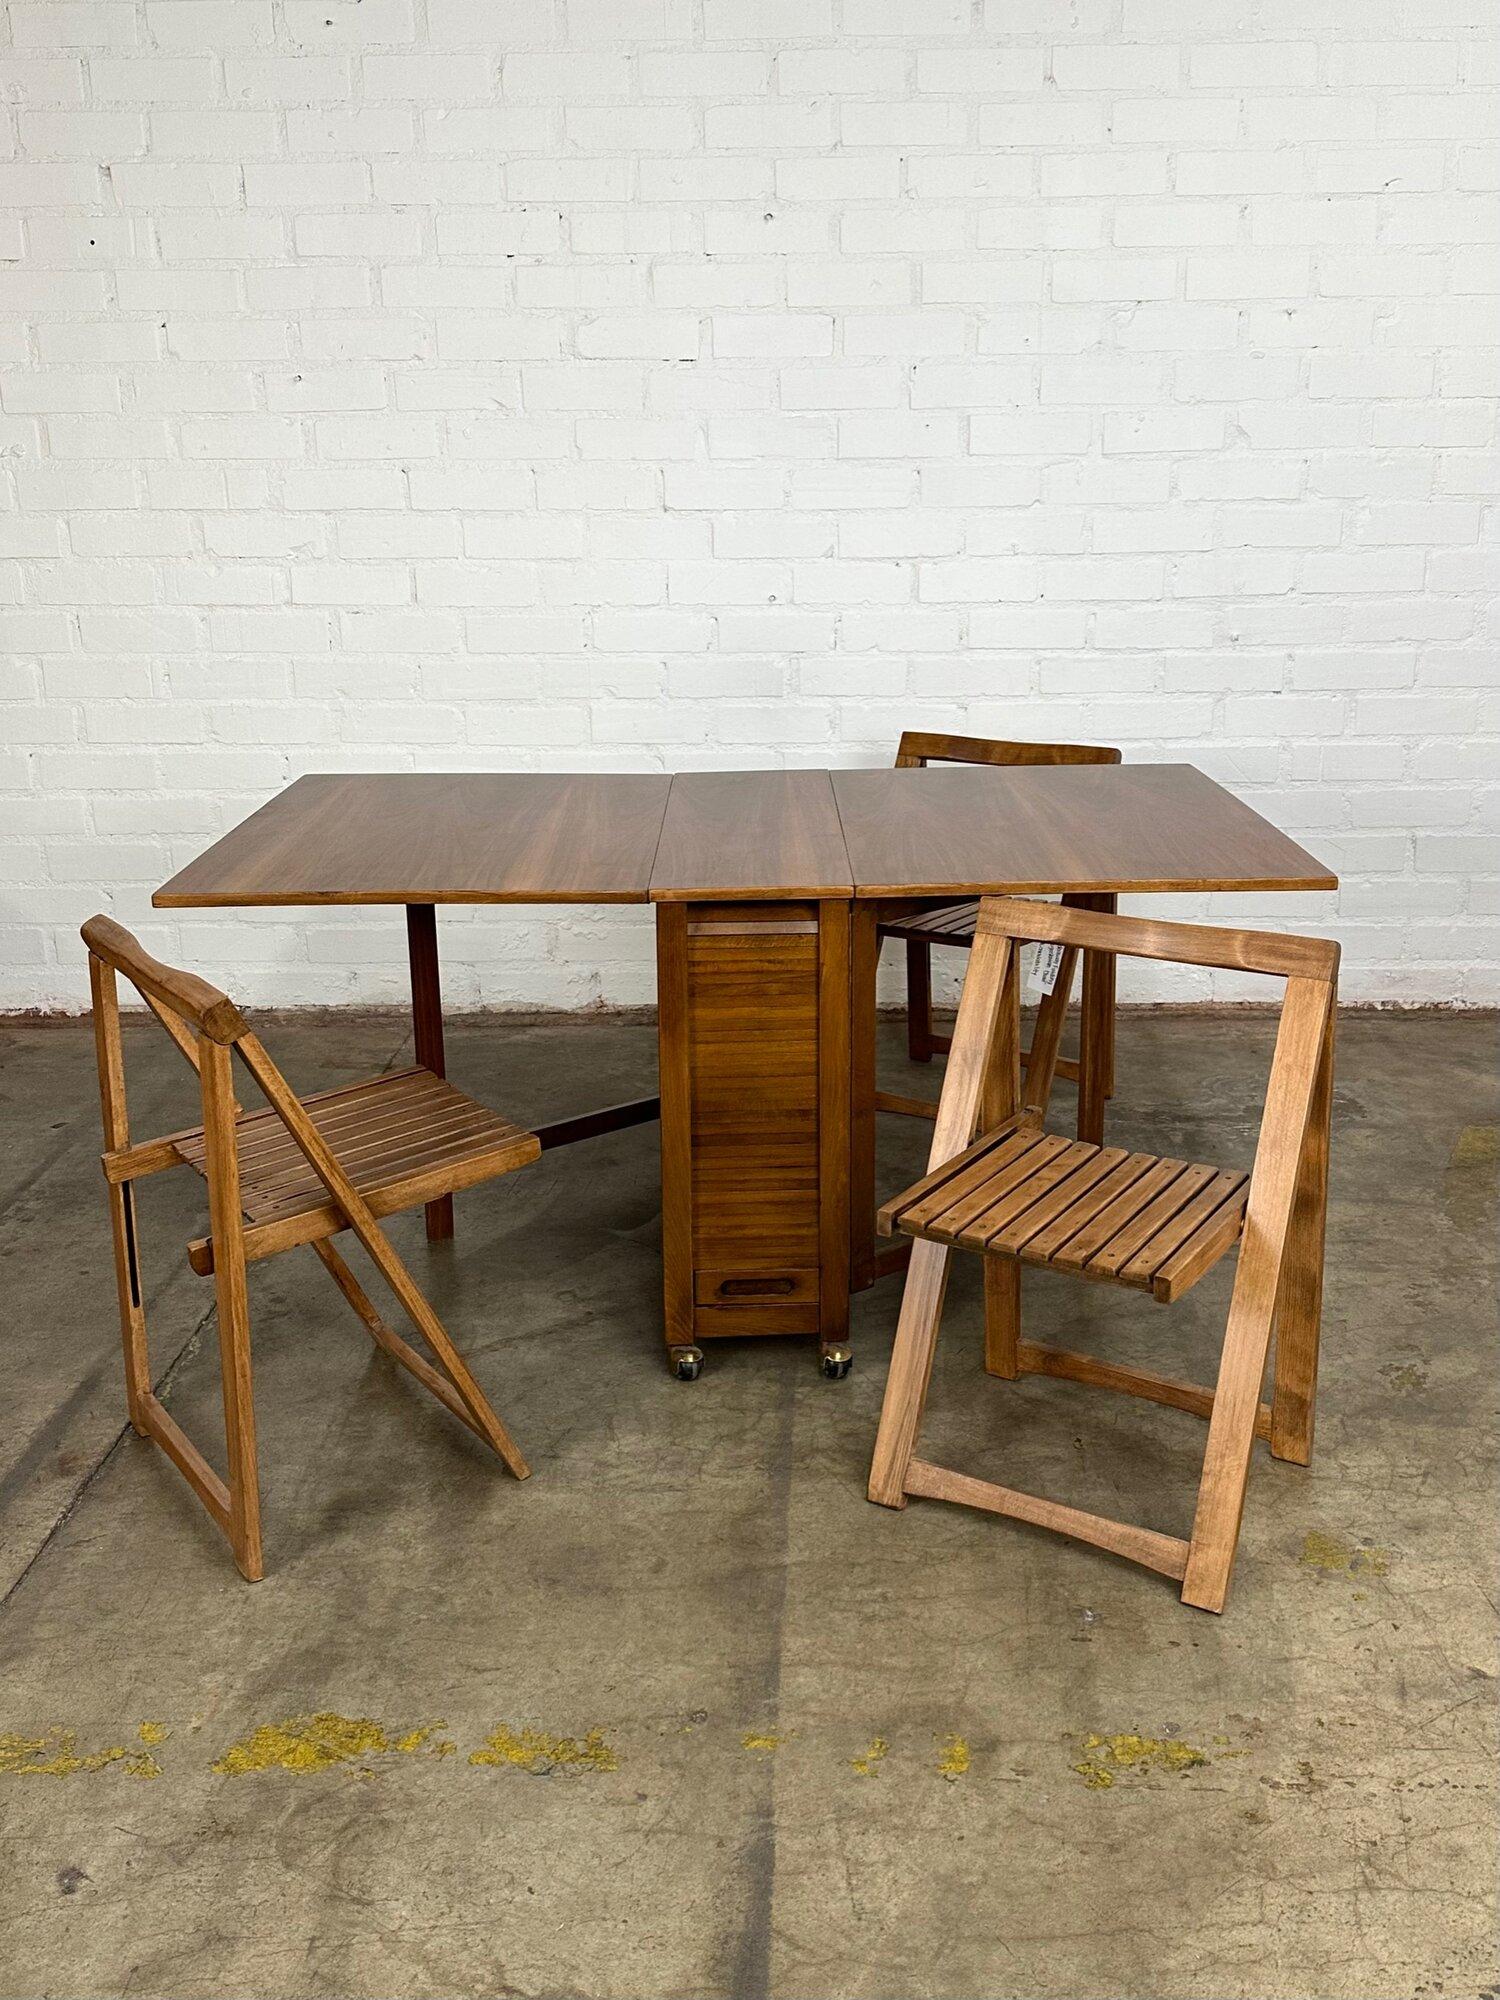 W62 D34 H29 KC28

Vintage walnut dining table with fold down leaf extensions, once down make the table slim and compact. The table features a Tambour slot on the center to hide folding chairs, available in separate post. The table has been fully